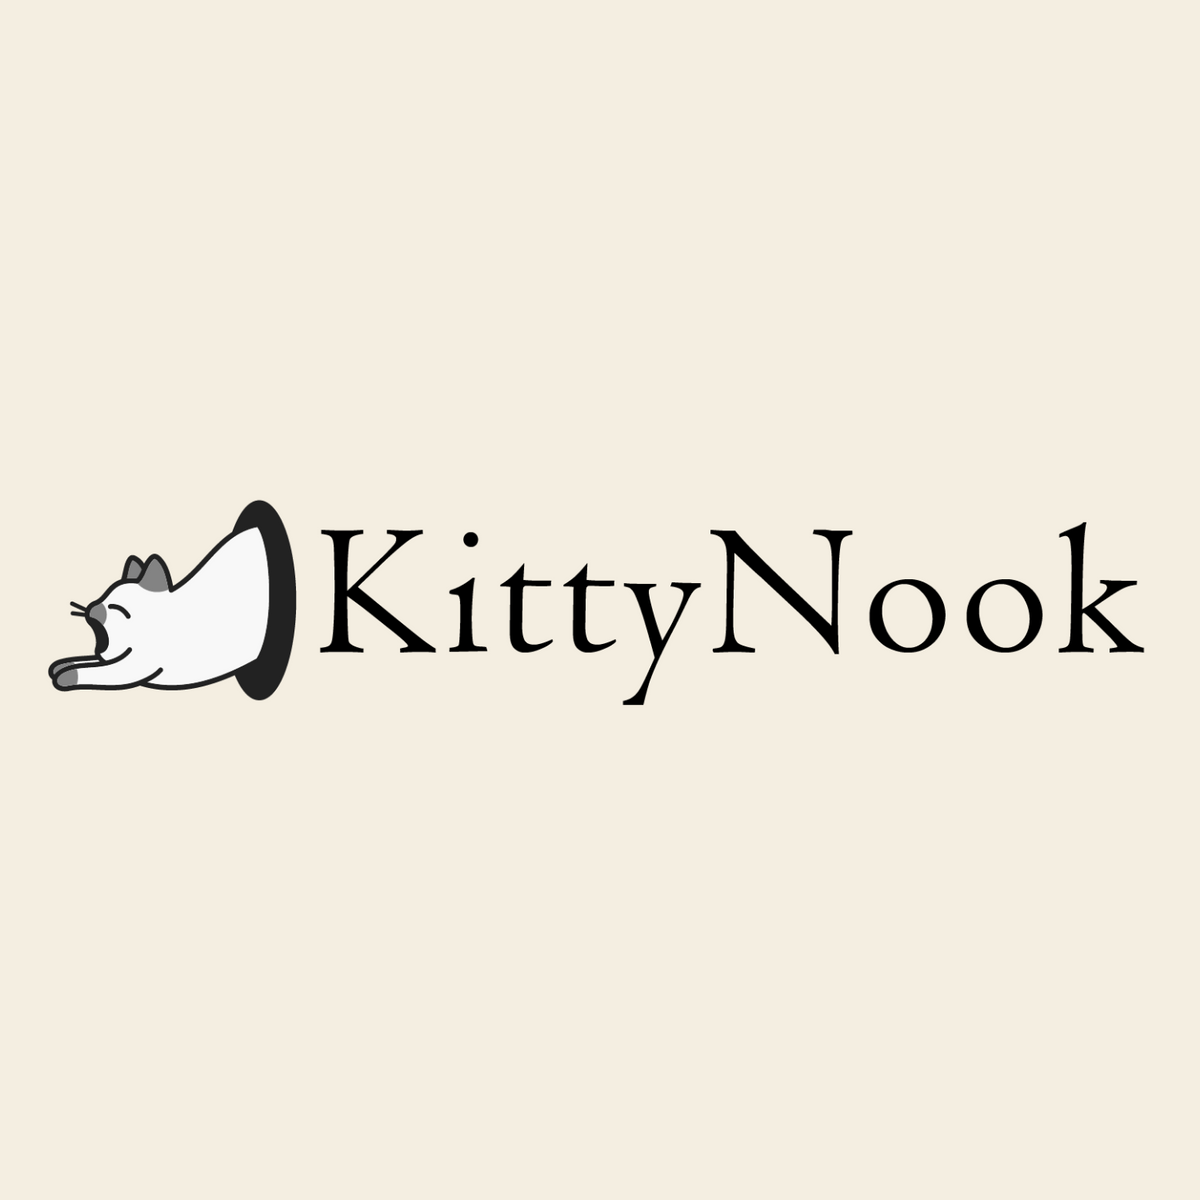 KittyNook | Home to the Purr-fect Feline. Cat Toys and Accessories